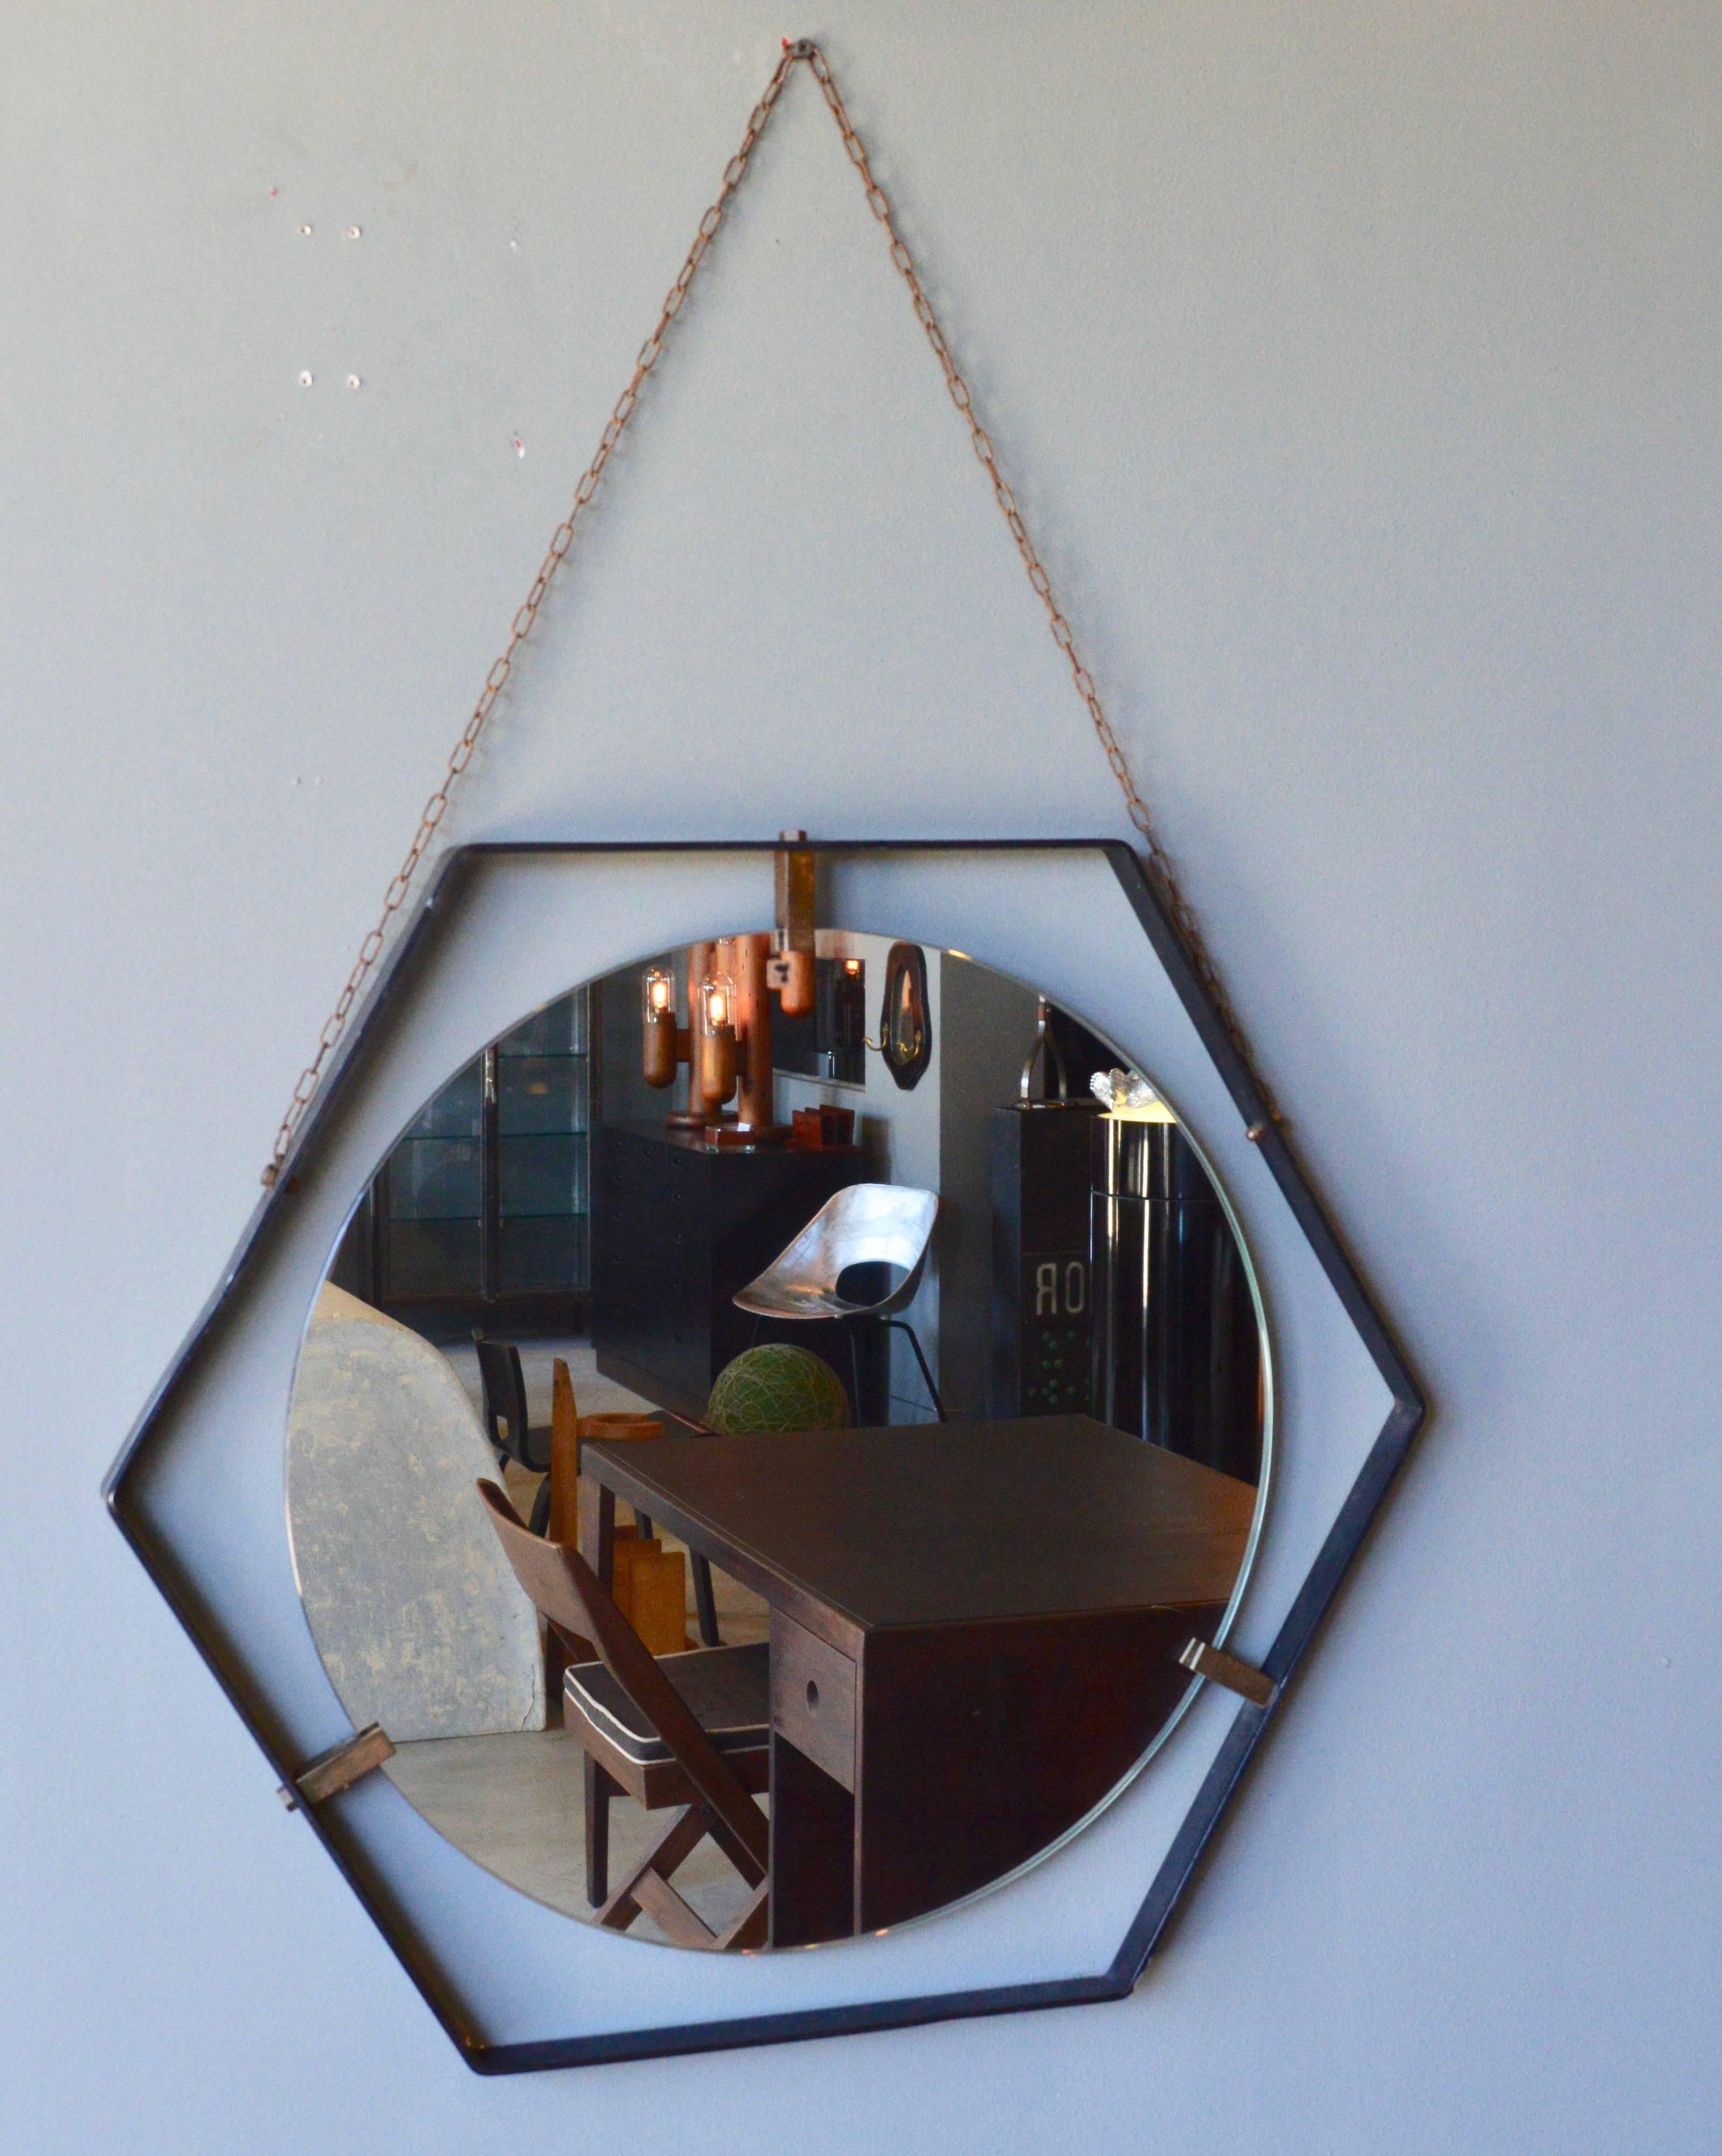 Sculptural vintage Italian floating mirror suspended from metal chain. Made in the 1960s. Only one available. Excellent vintage condition. Similar round and ovular mirrors available in separate listings.